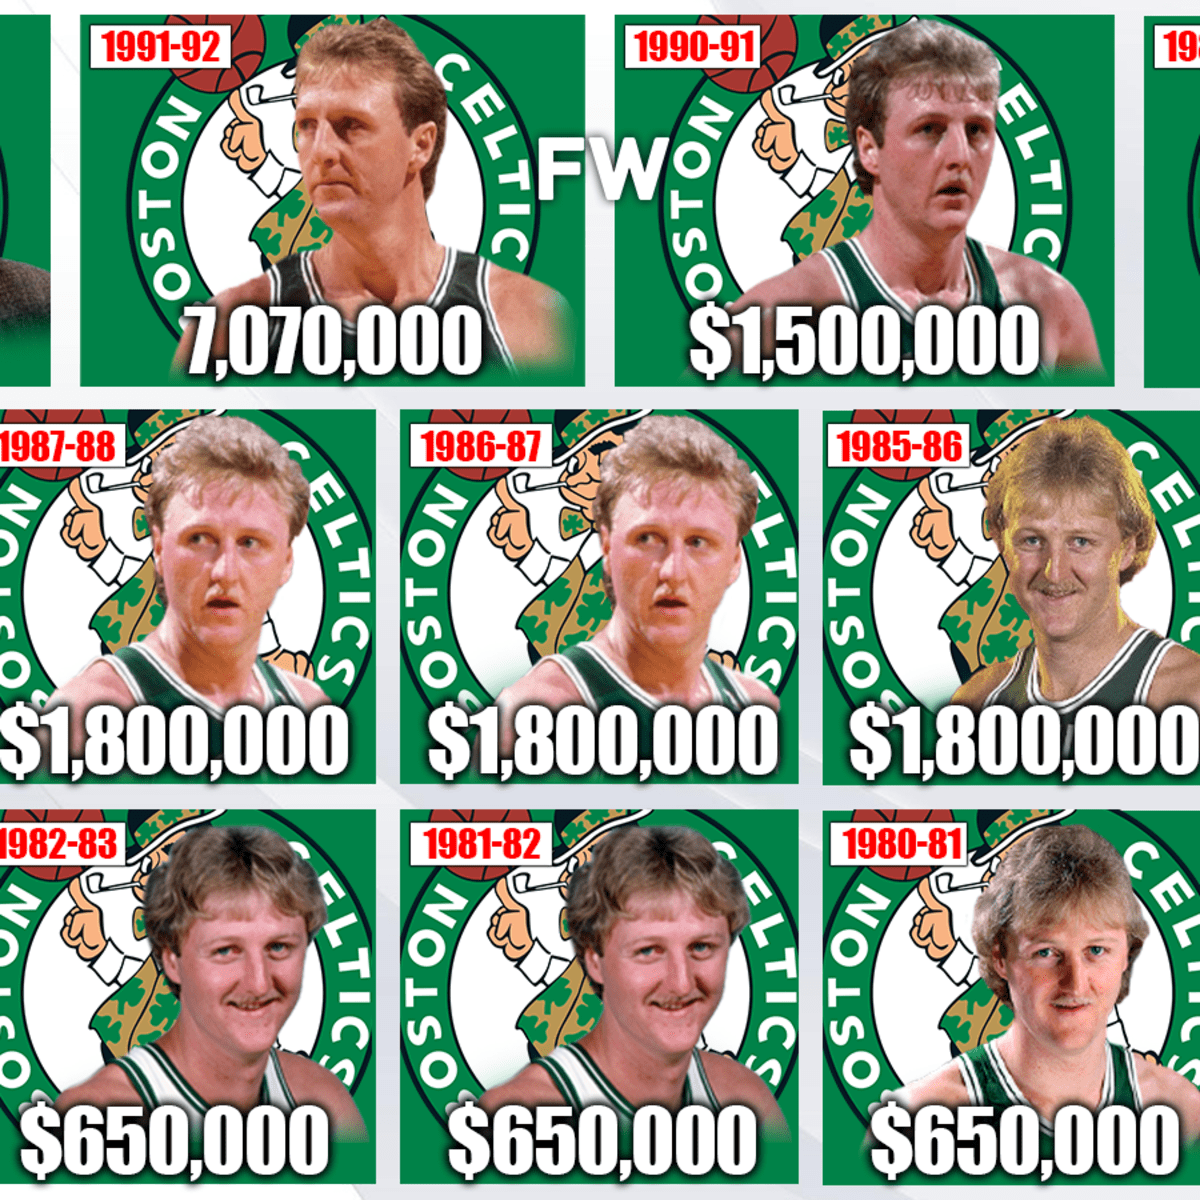 Larry Bird Made $24 Million in the NBA but Never Spent His Money on Lavish  Purchases: 'I'll Wear Pretty Much Anything If I Get It for Free